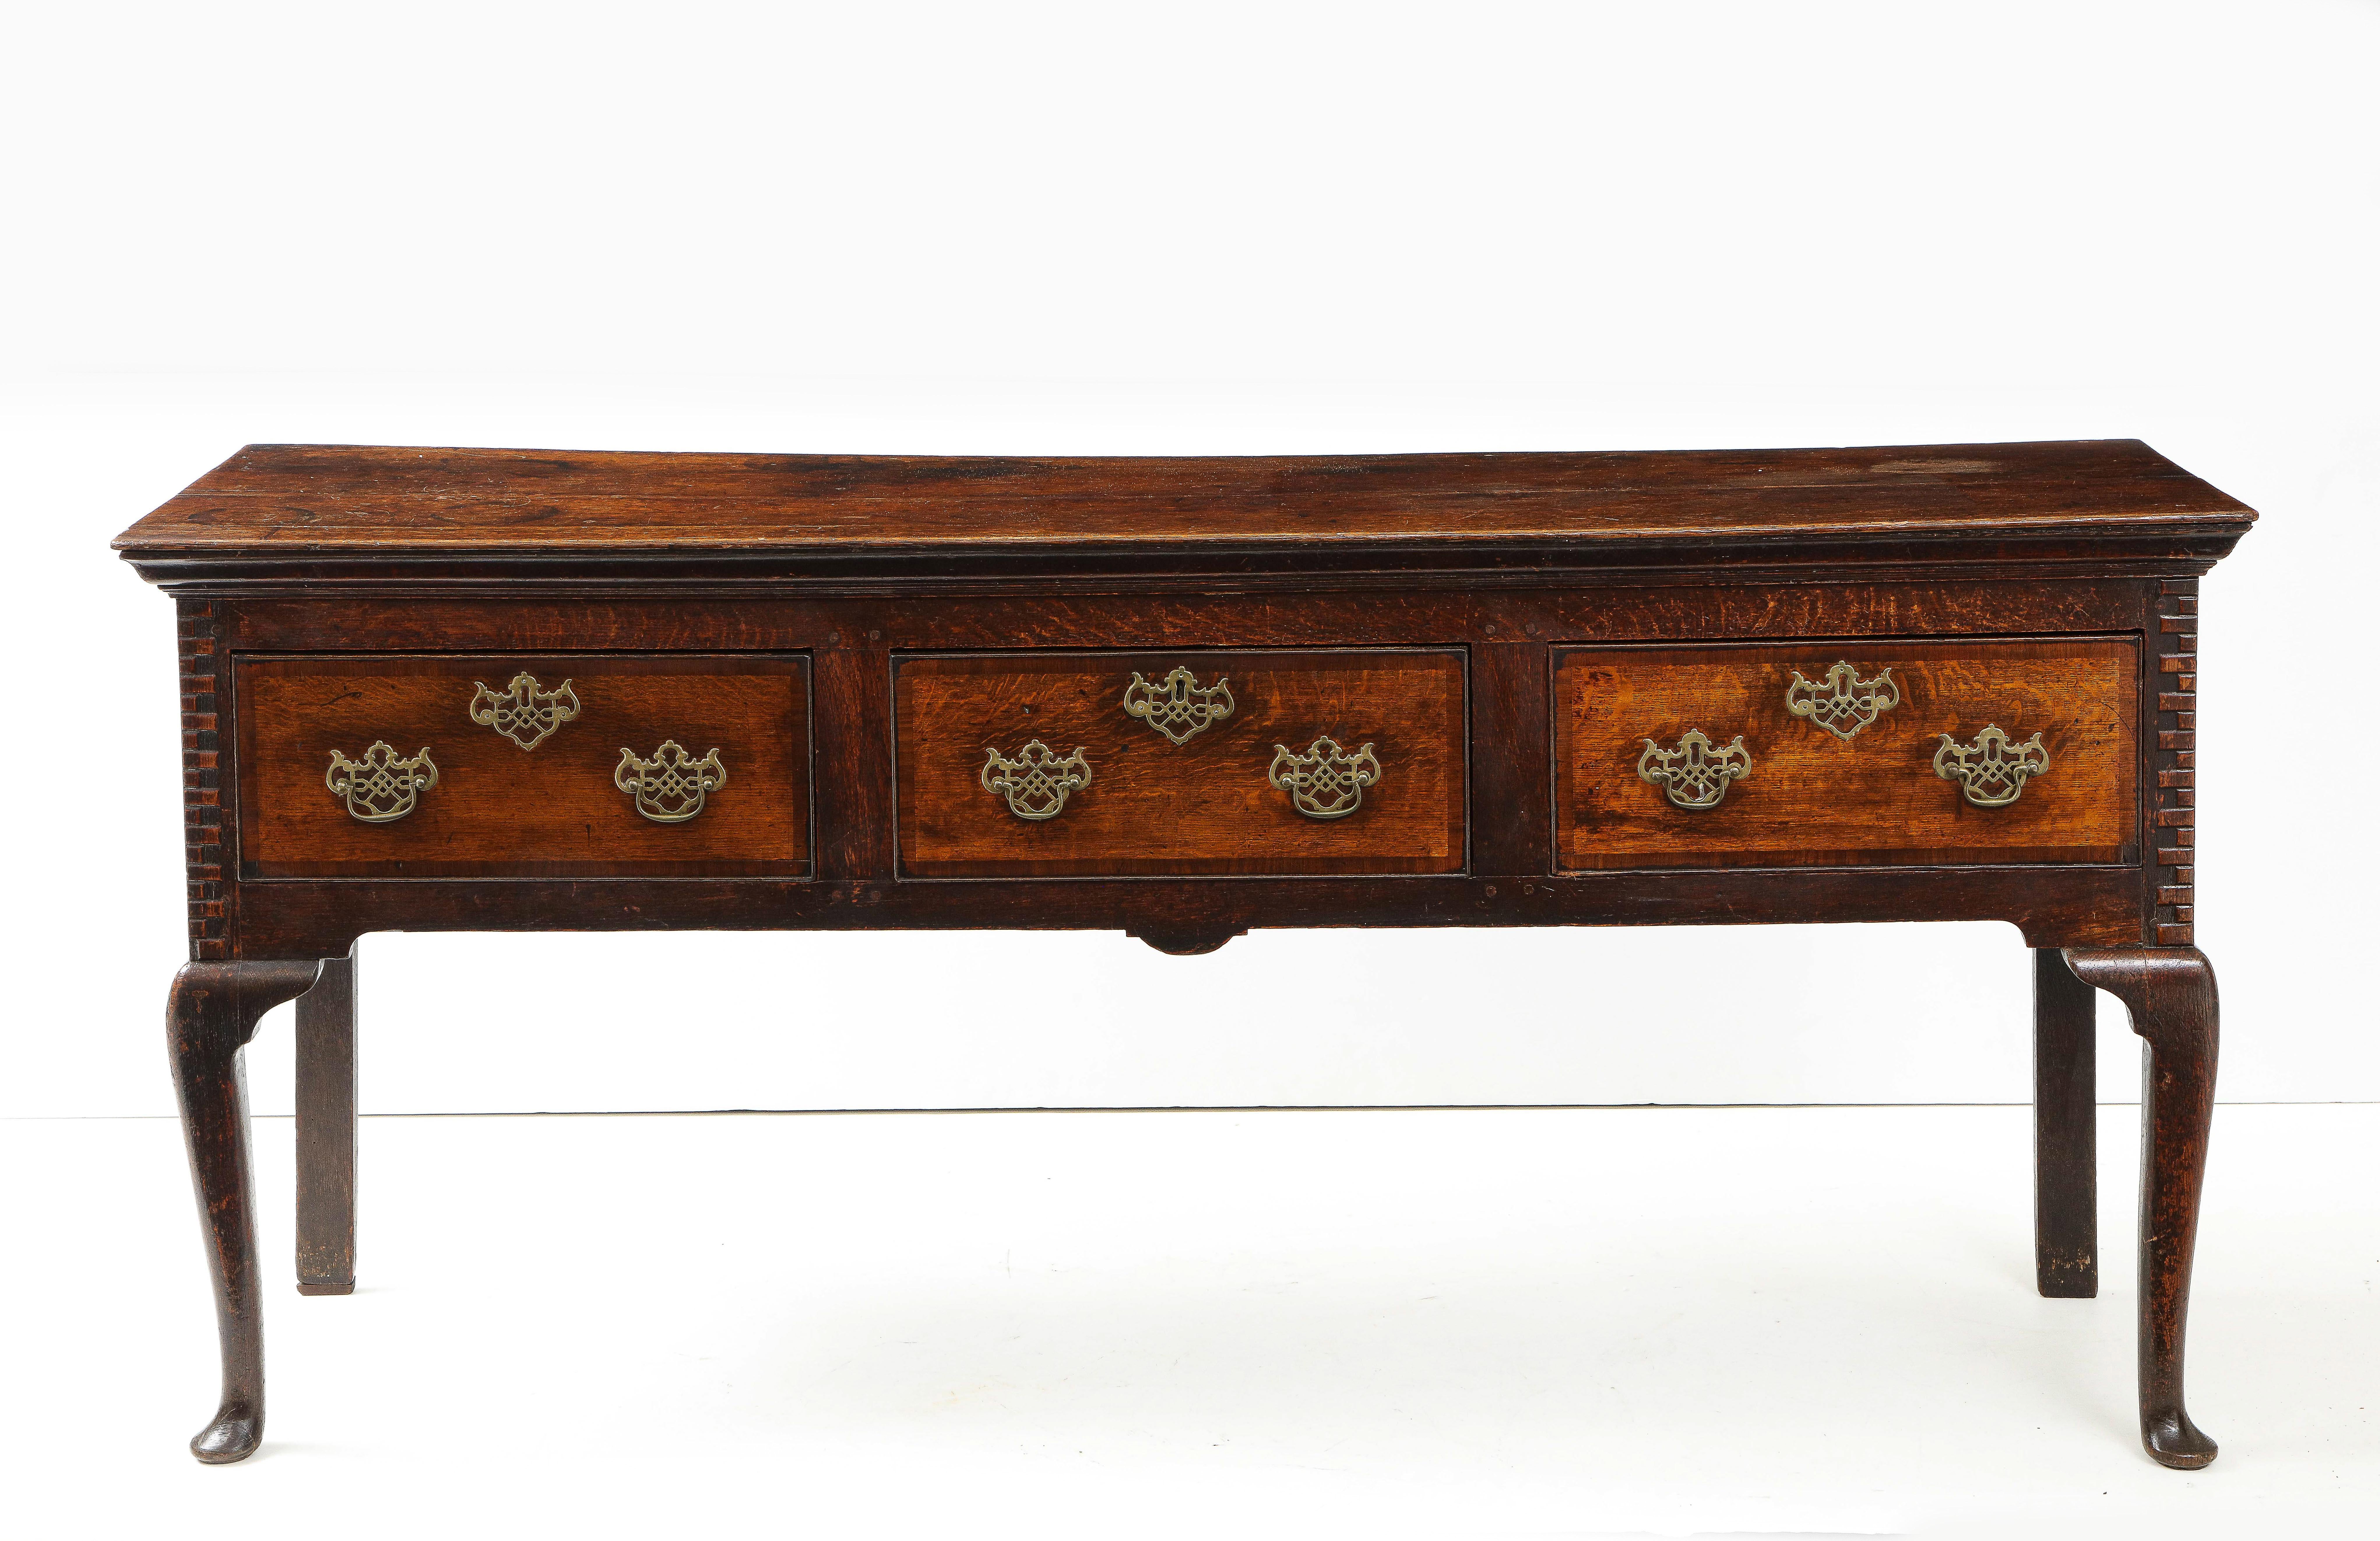 Fine George II period oak low dresser, the under-molded top over three drawers having mahogany banding and pierced brass hardware, the corners with brickwork quoin rustication, standing on cabriole legs ending in pad feet, the whole with good rich